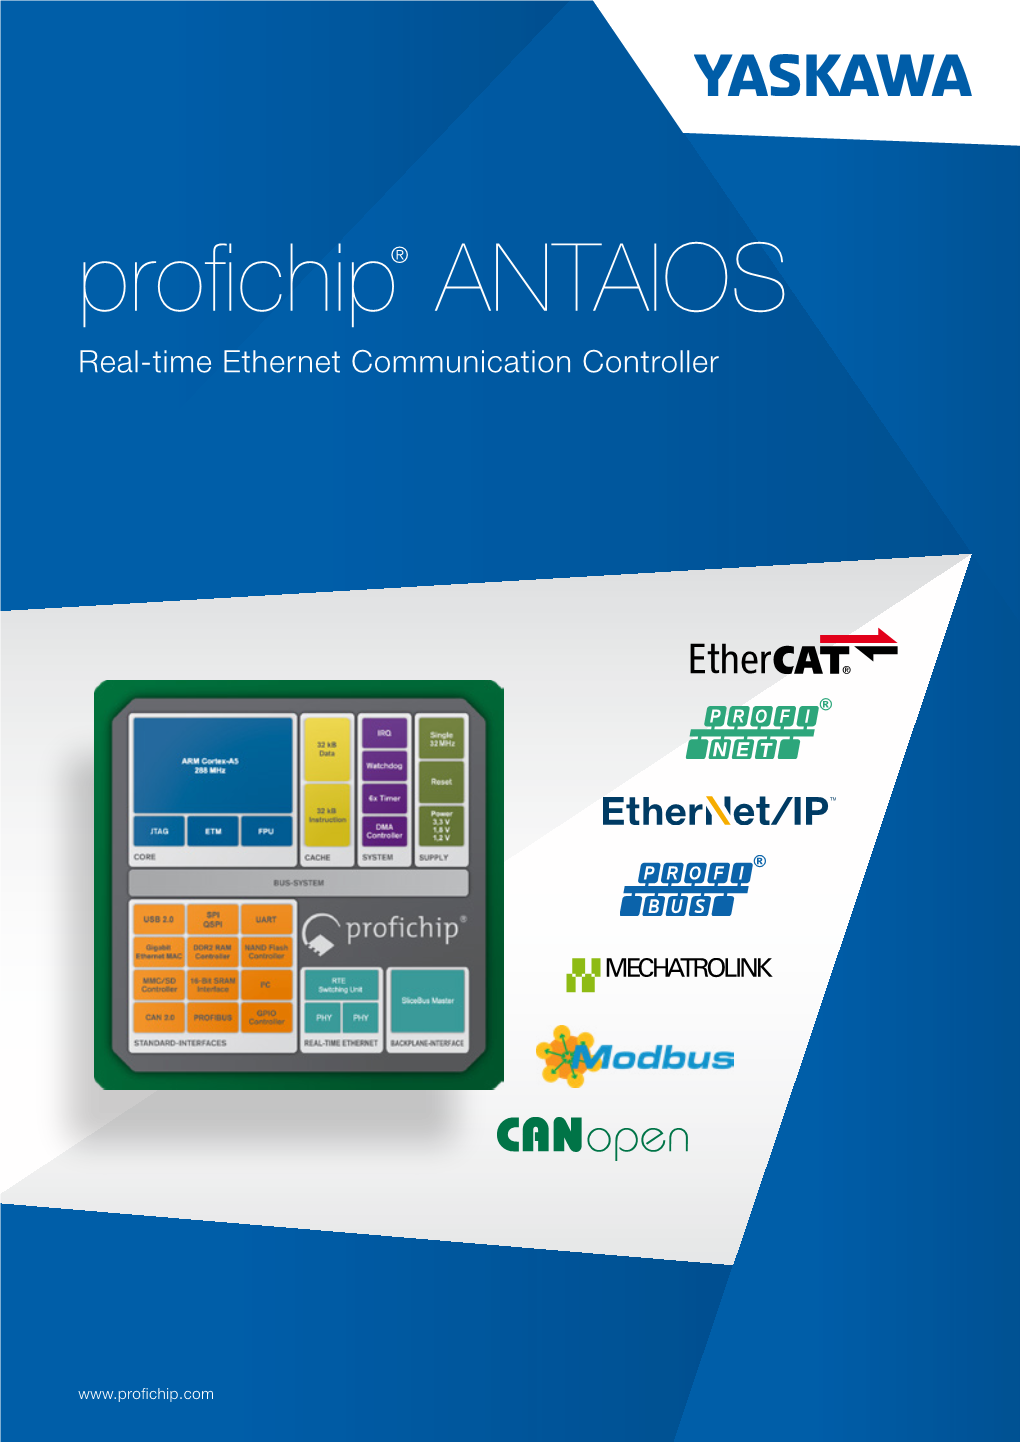 Profichip® ANTAIOS Real-Time Ethernet Communication Controller